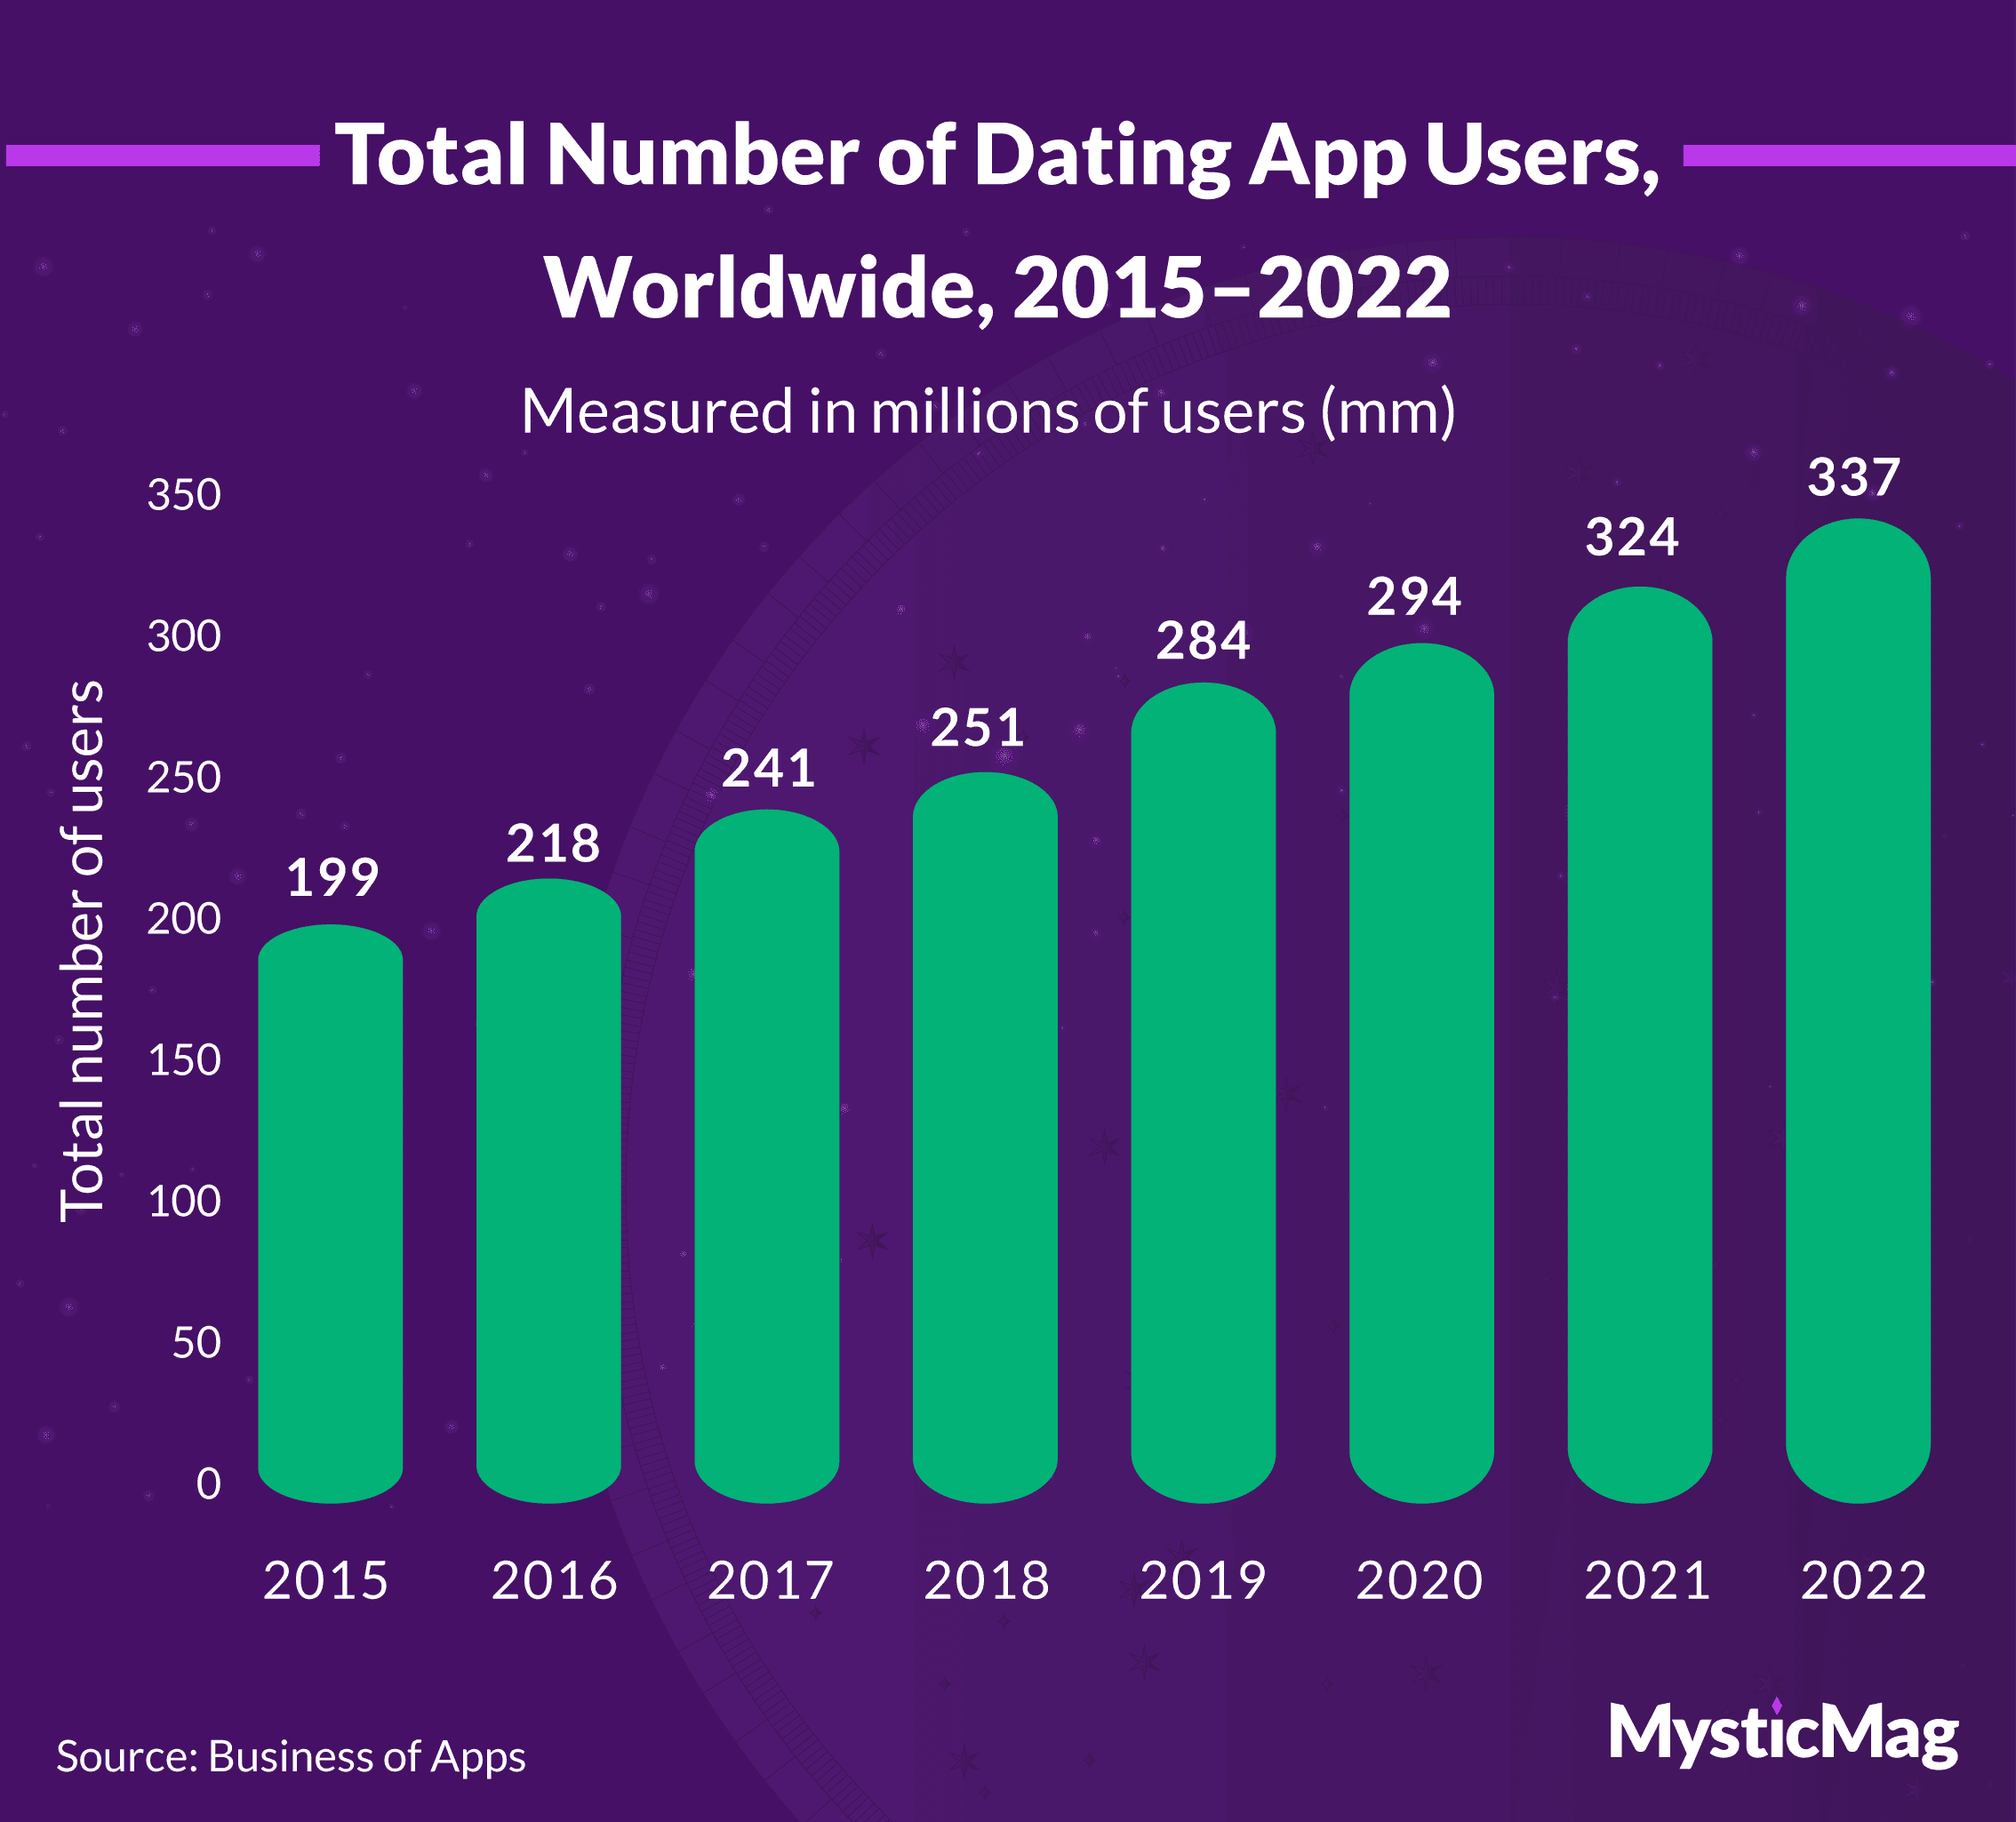 Global total number of dating app users, 2015-2022